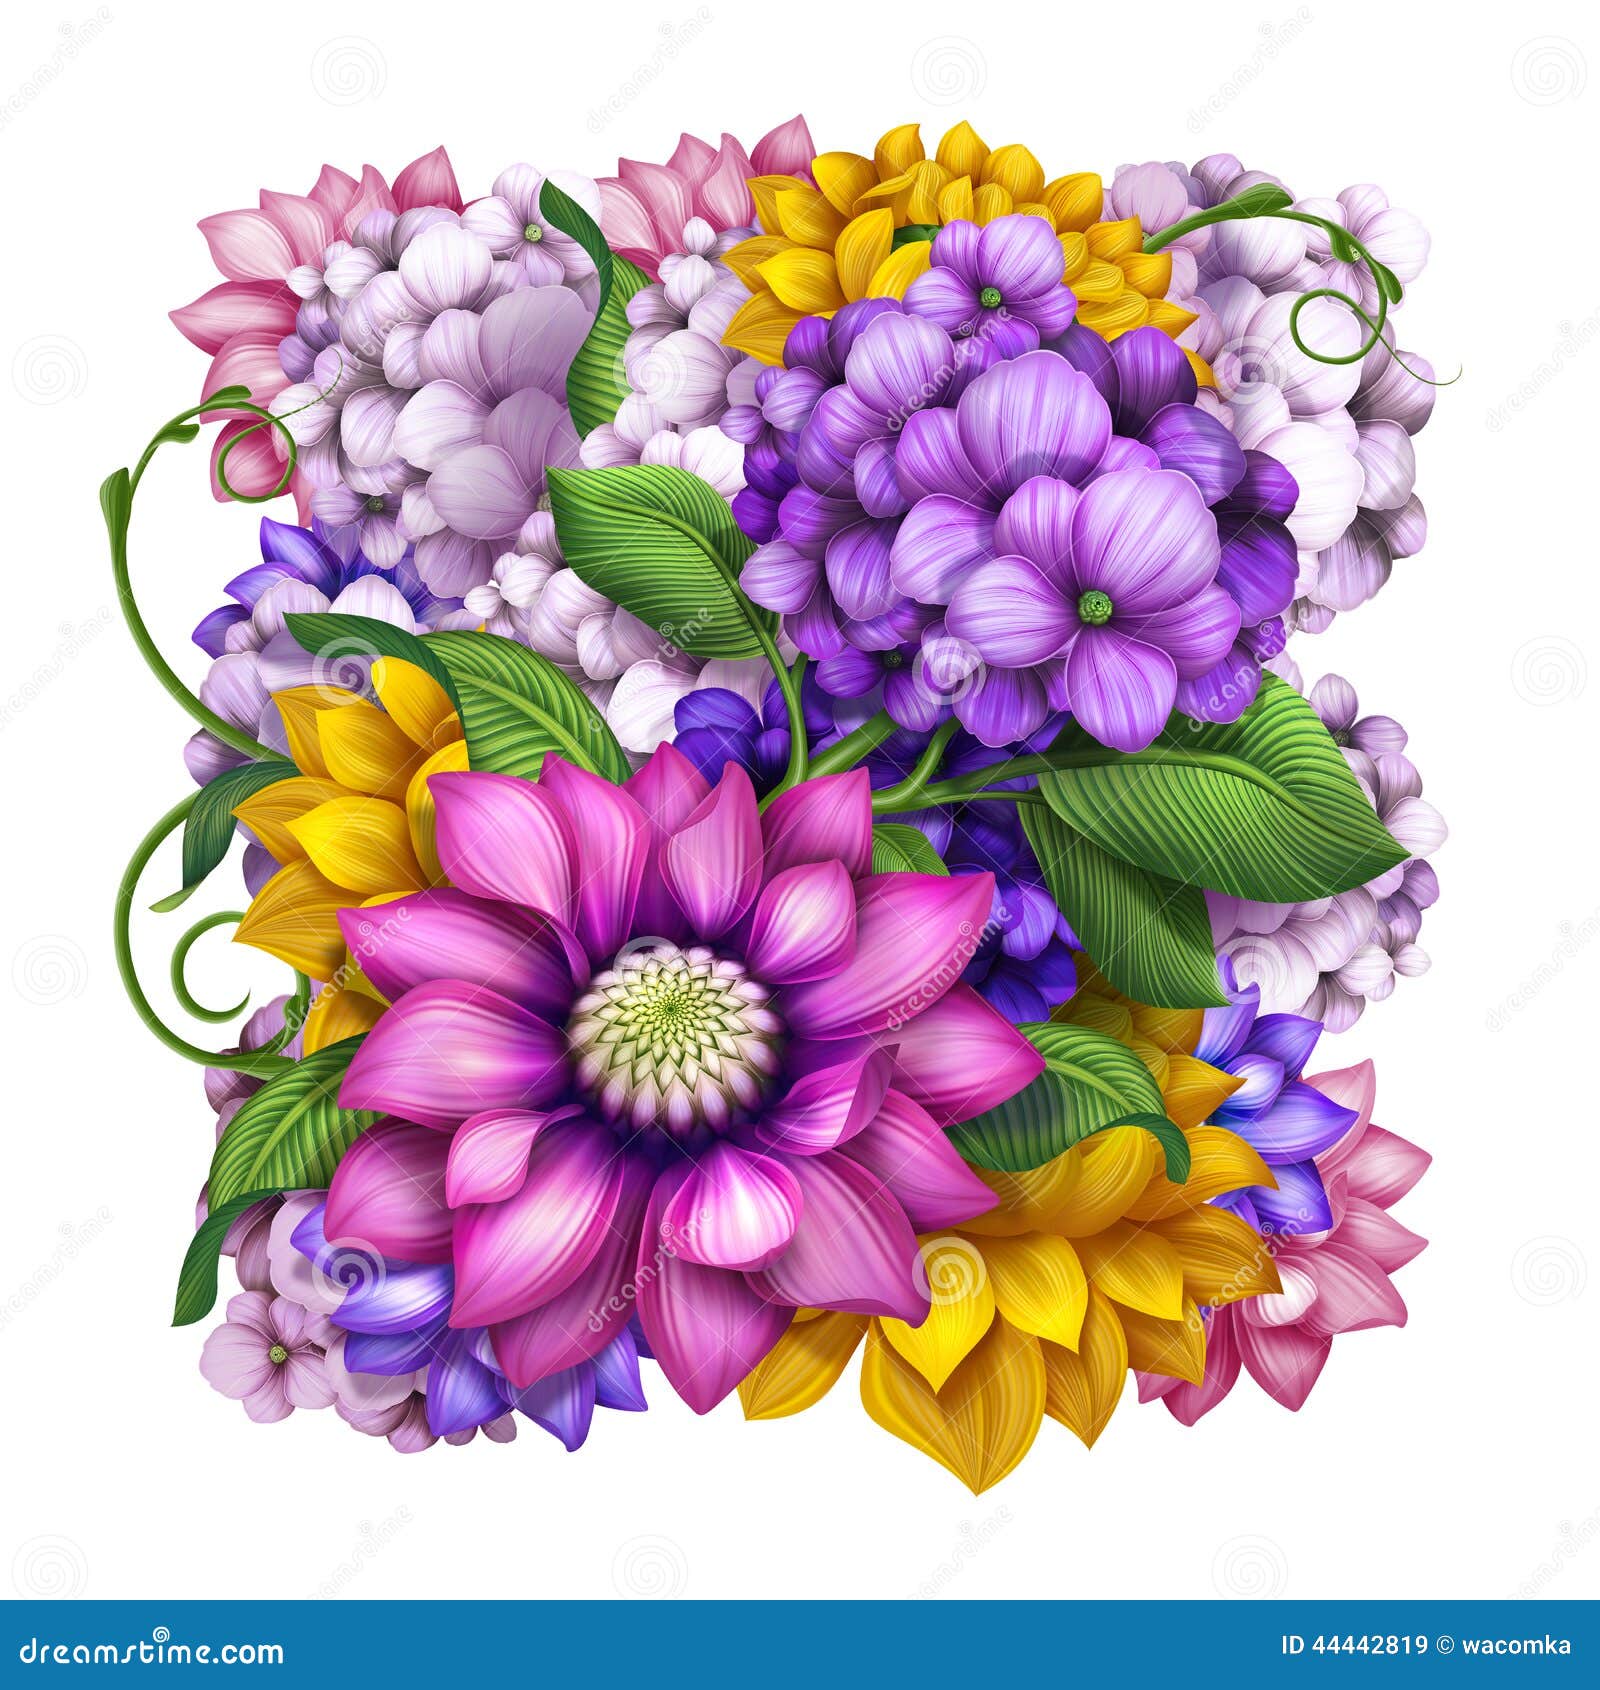 Assorted Spring And Summer Flowers Illustration Stock ...